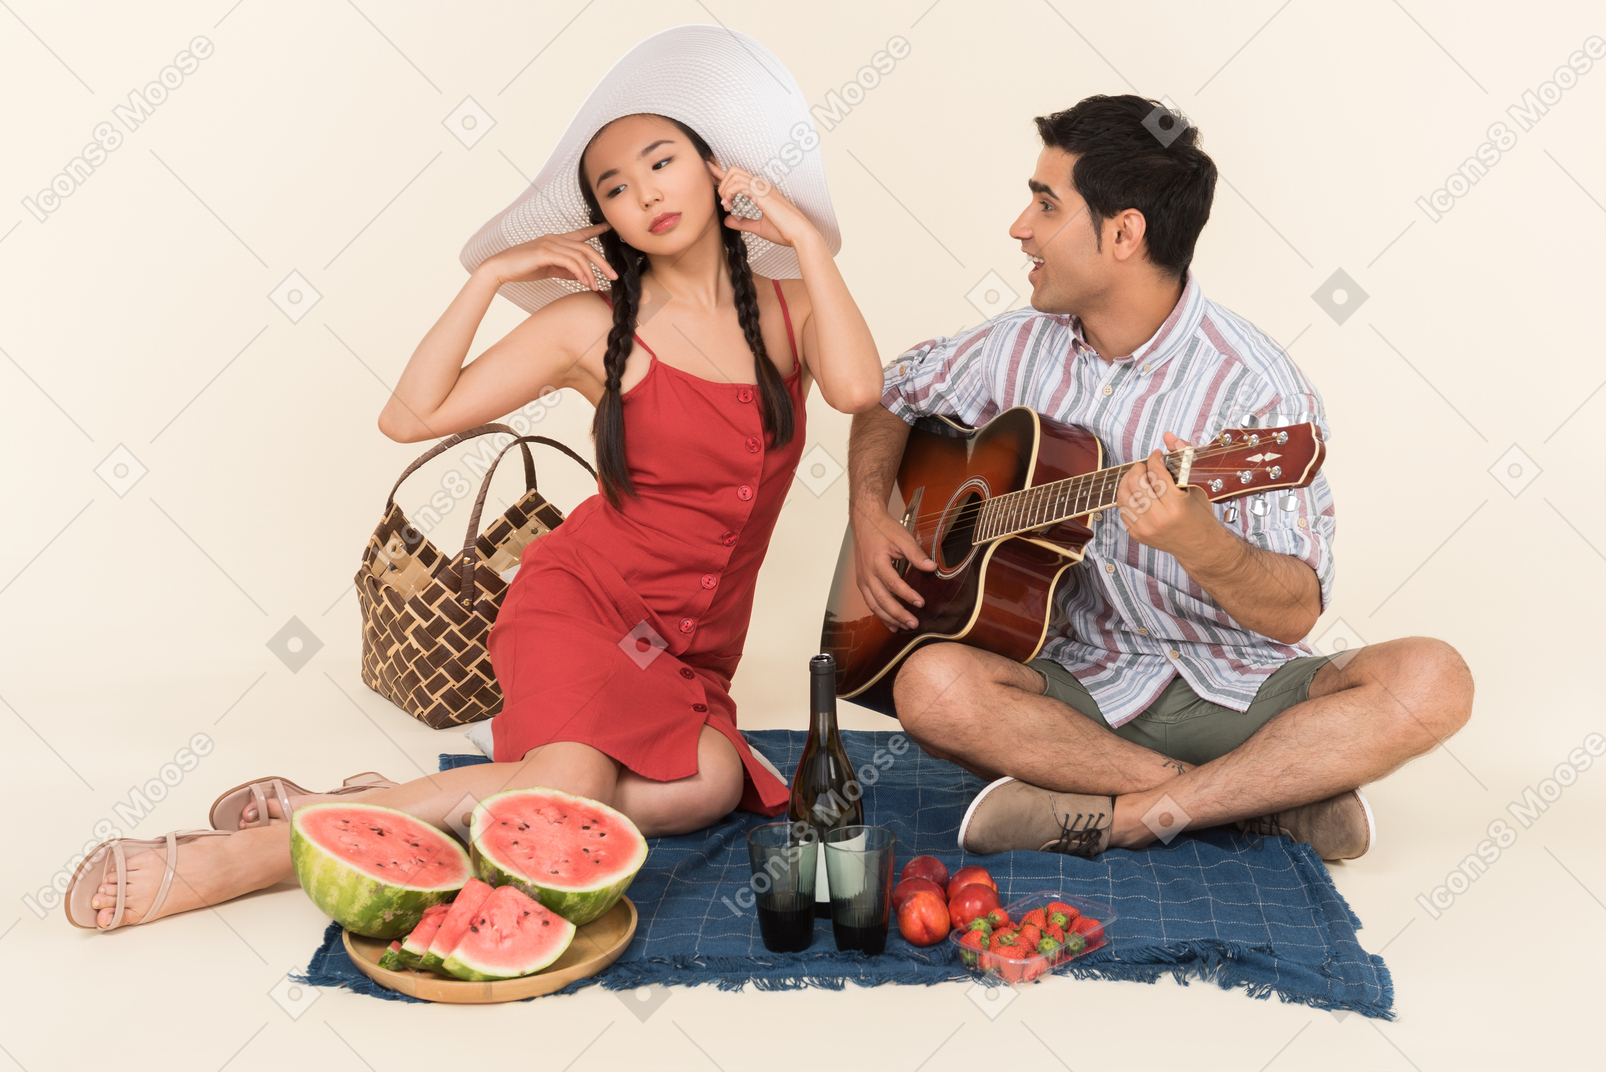 Interracial couple having picnic and man playing on guitar